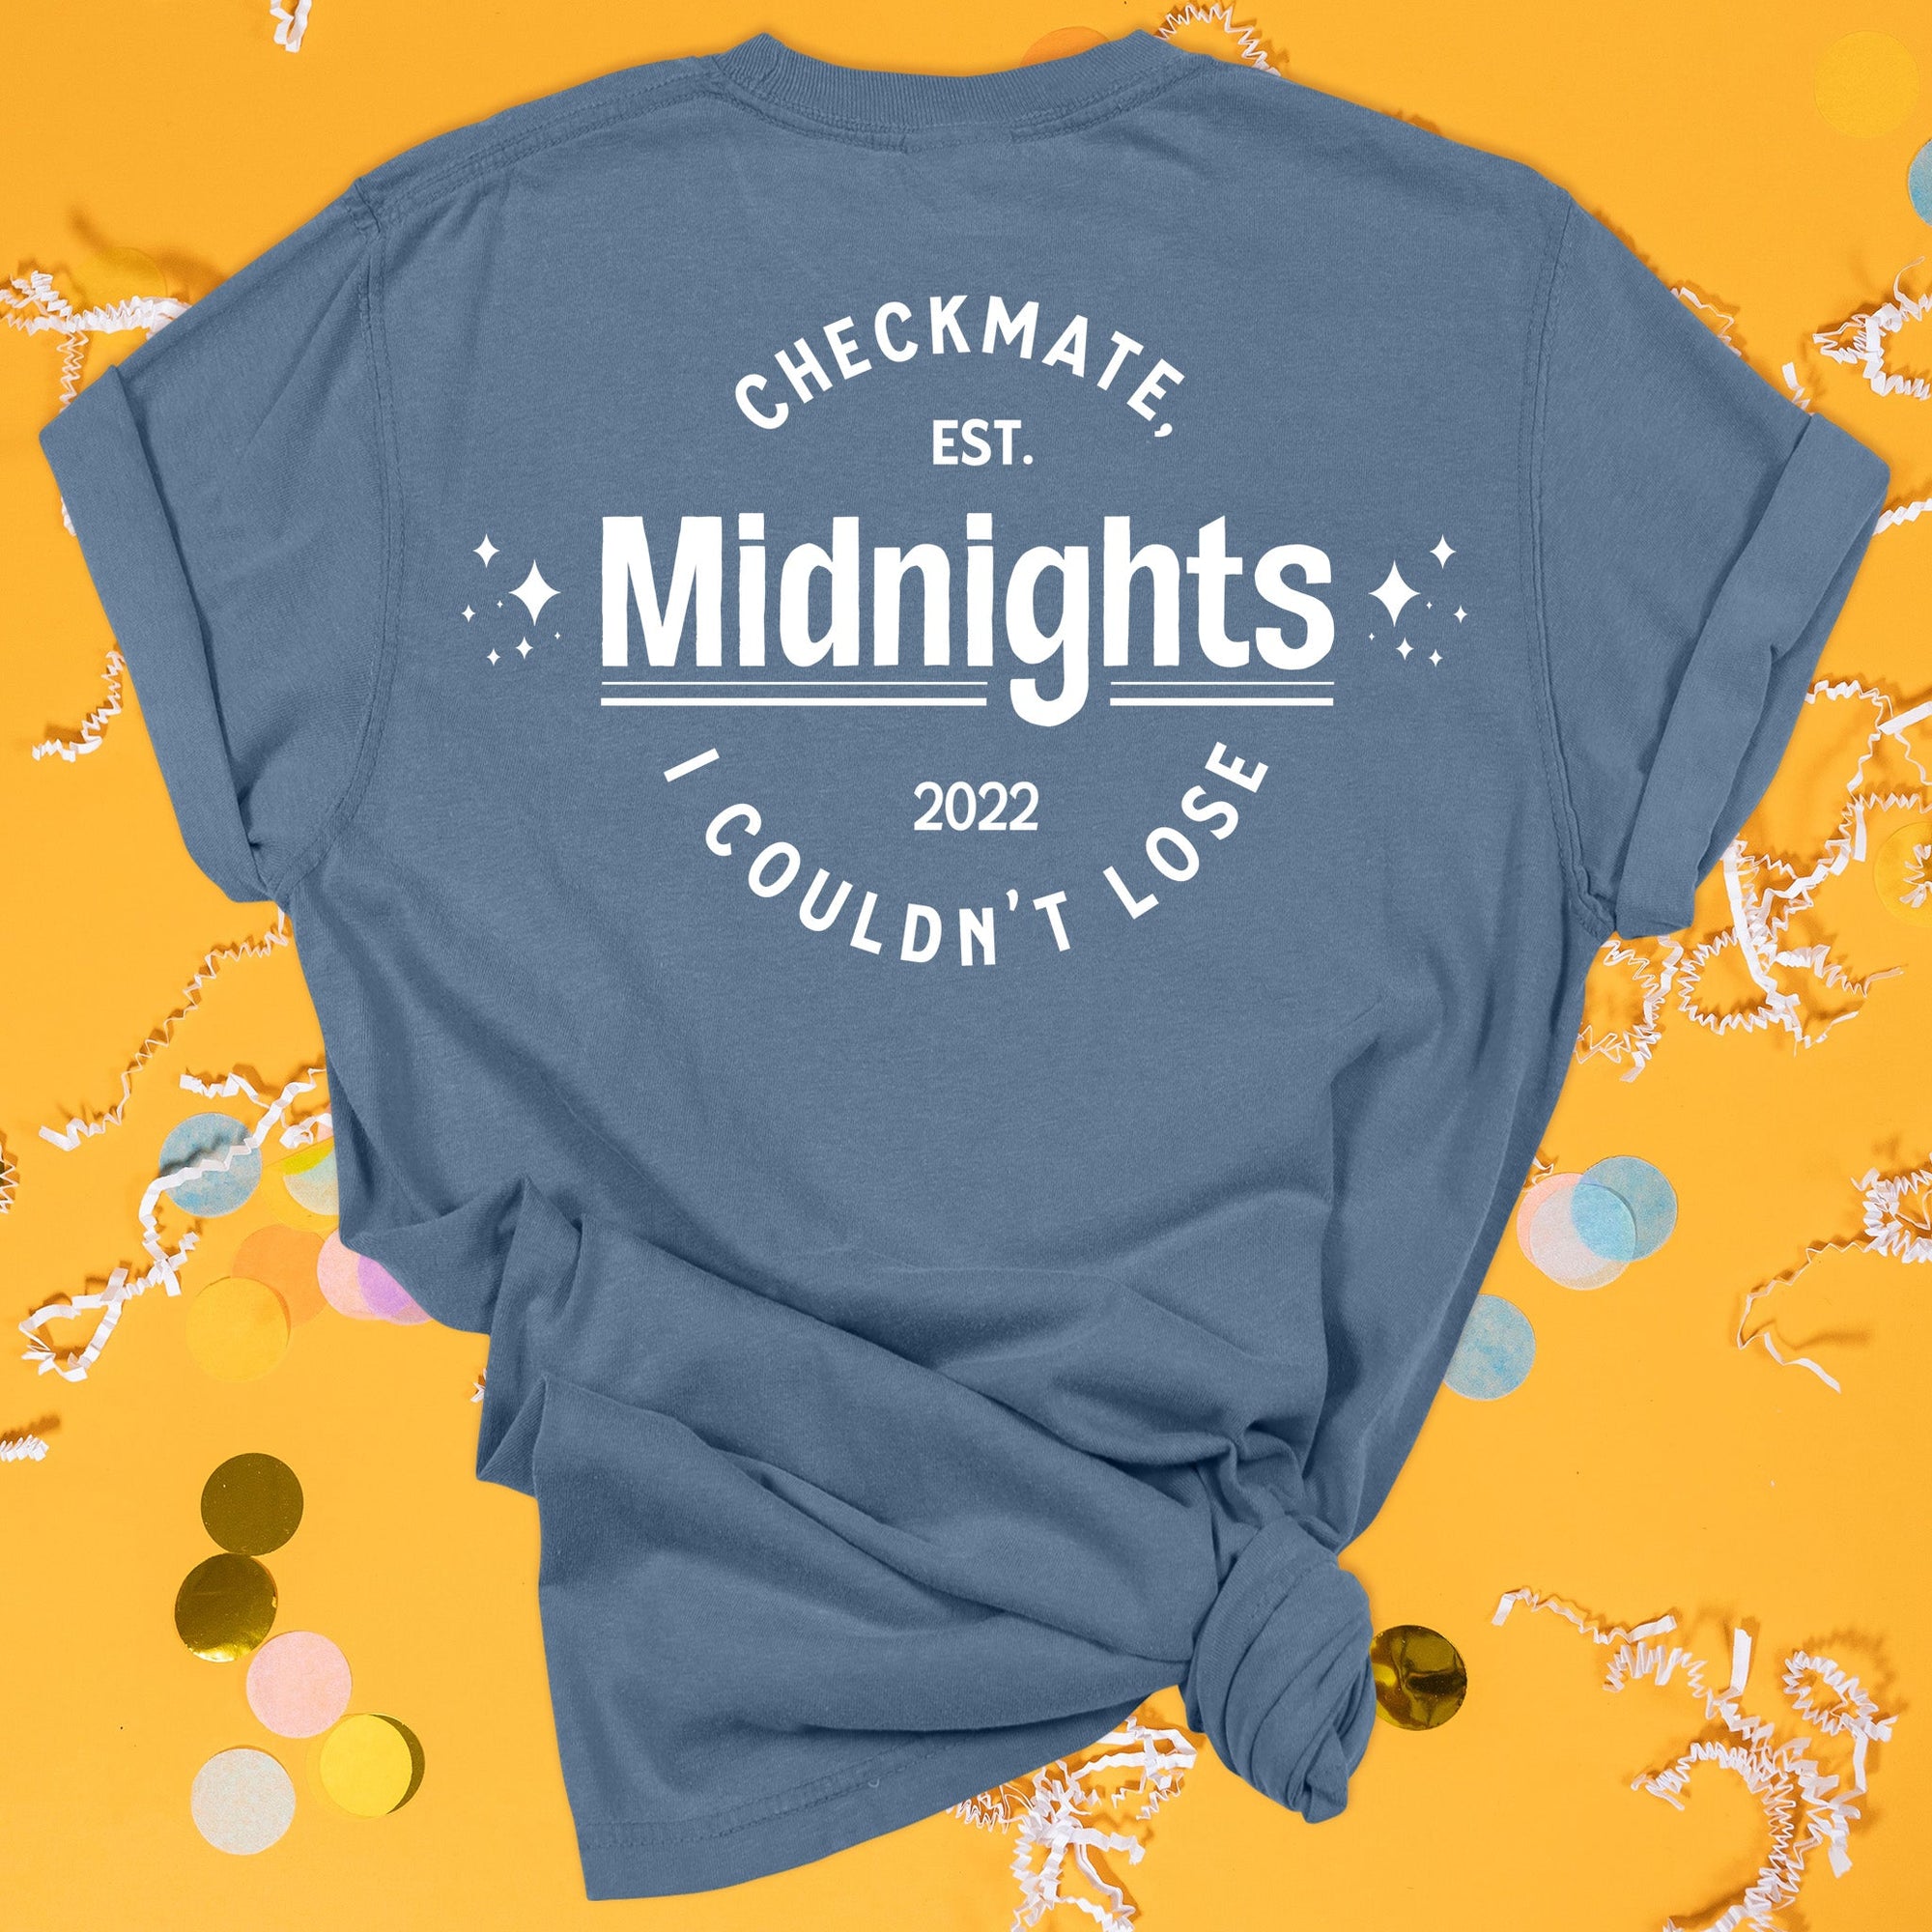 On a sunny mustard background sits the back of a t-shirt with white crinkle and big, colorful confetti scattered around. This Taylor Swift Inspired Reputation tee is dark blue with white lettering and sparkle stars. It says "CHECKMATE, I COULDN'T LOSE", "EST. 2022", and "Midnights."